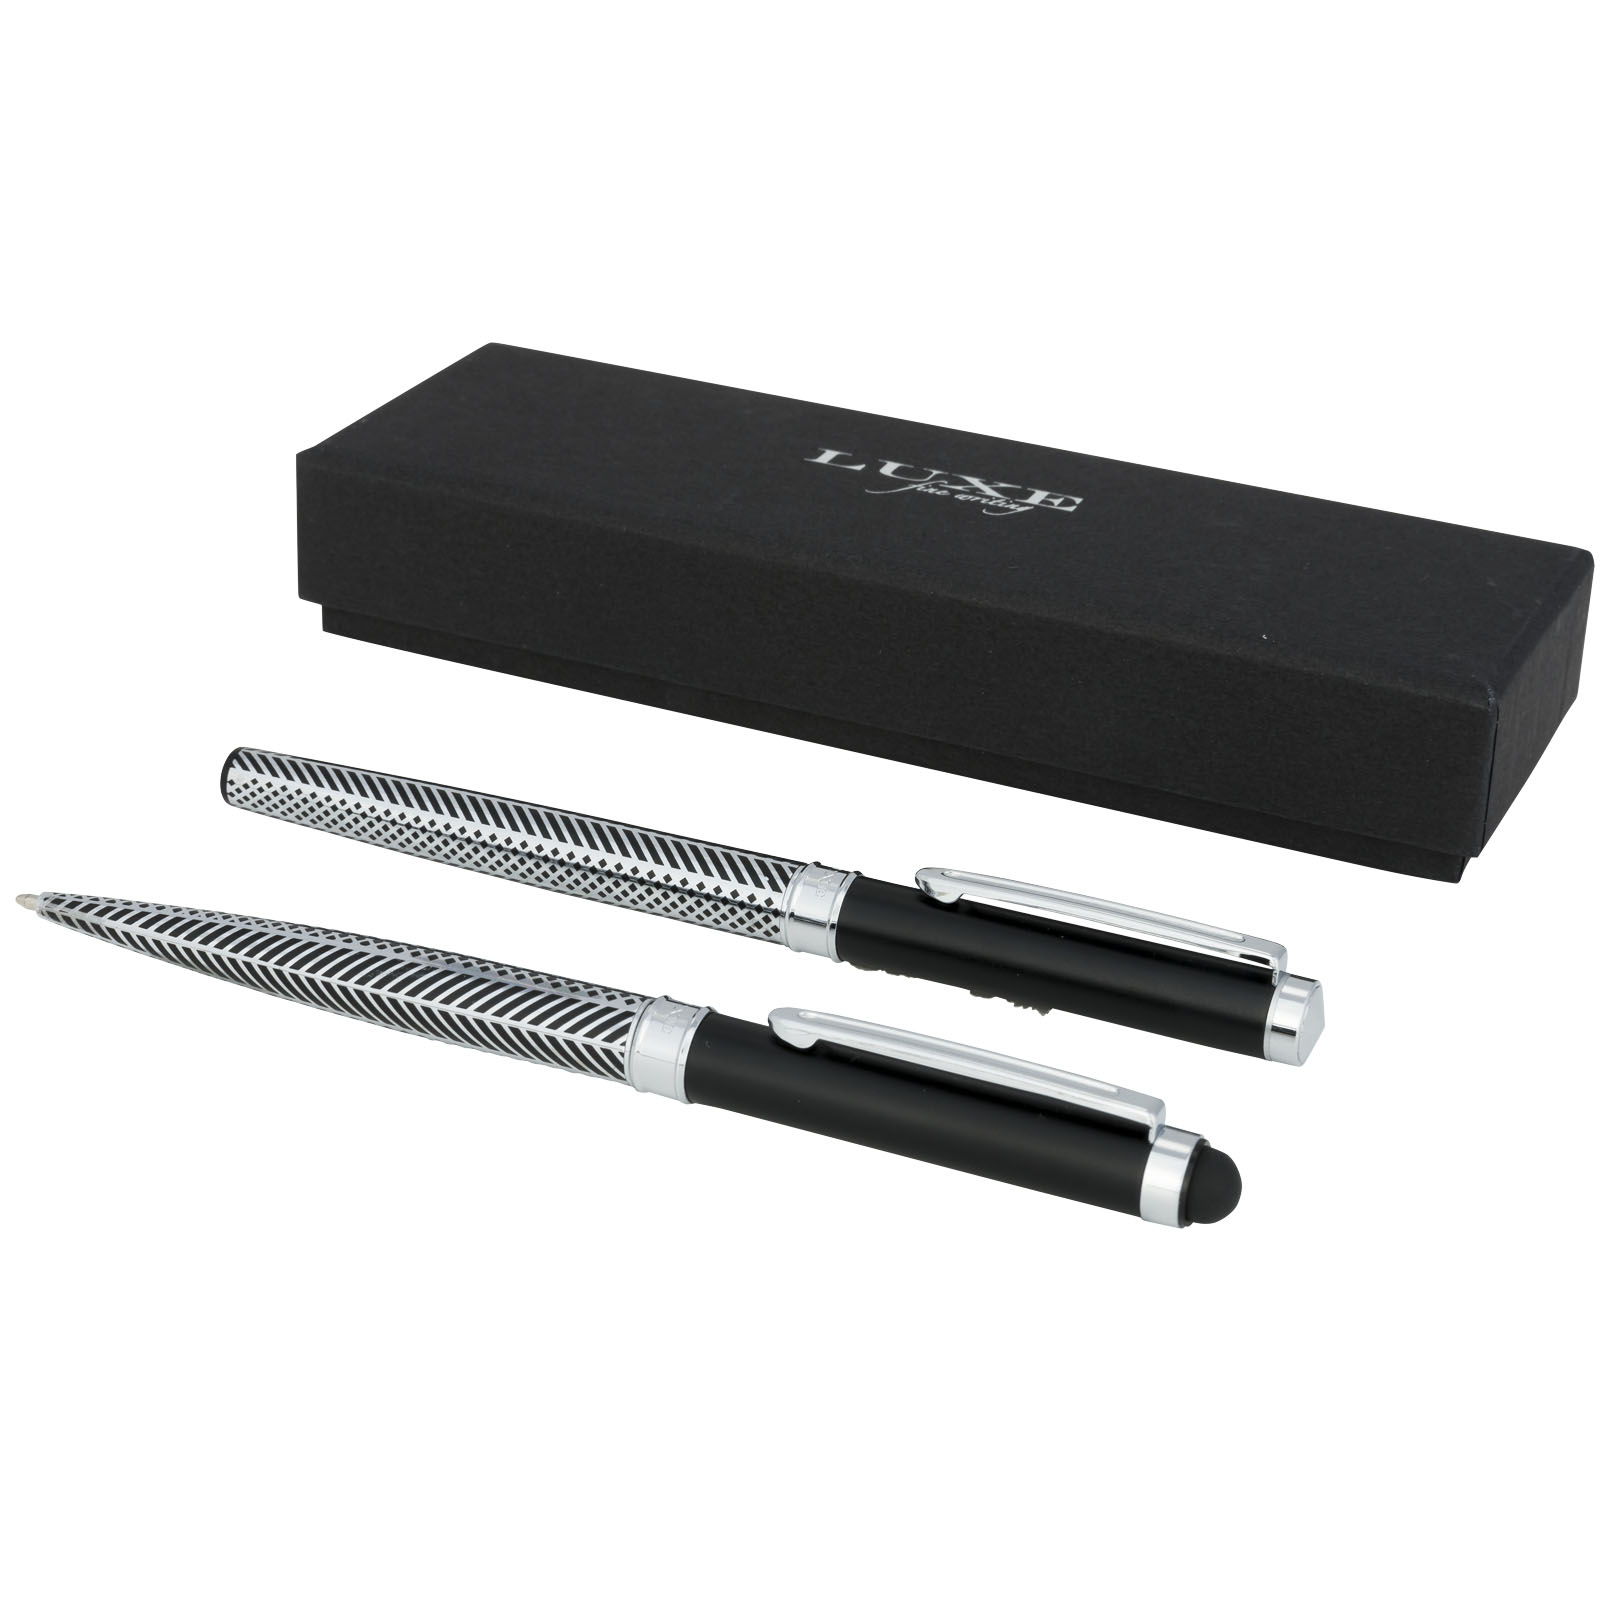 Gift sets - Empire duo pen gift set